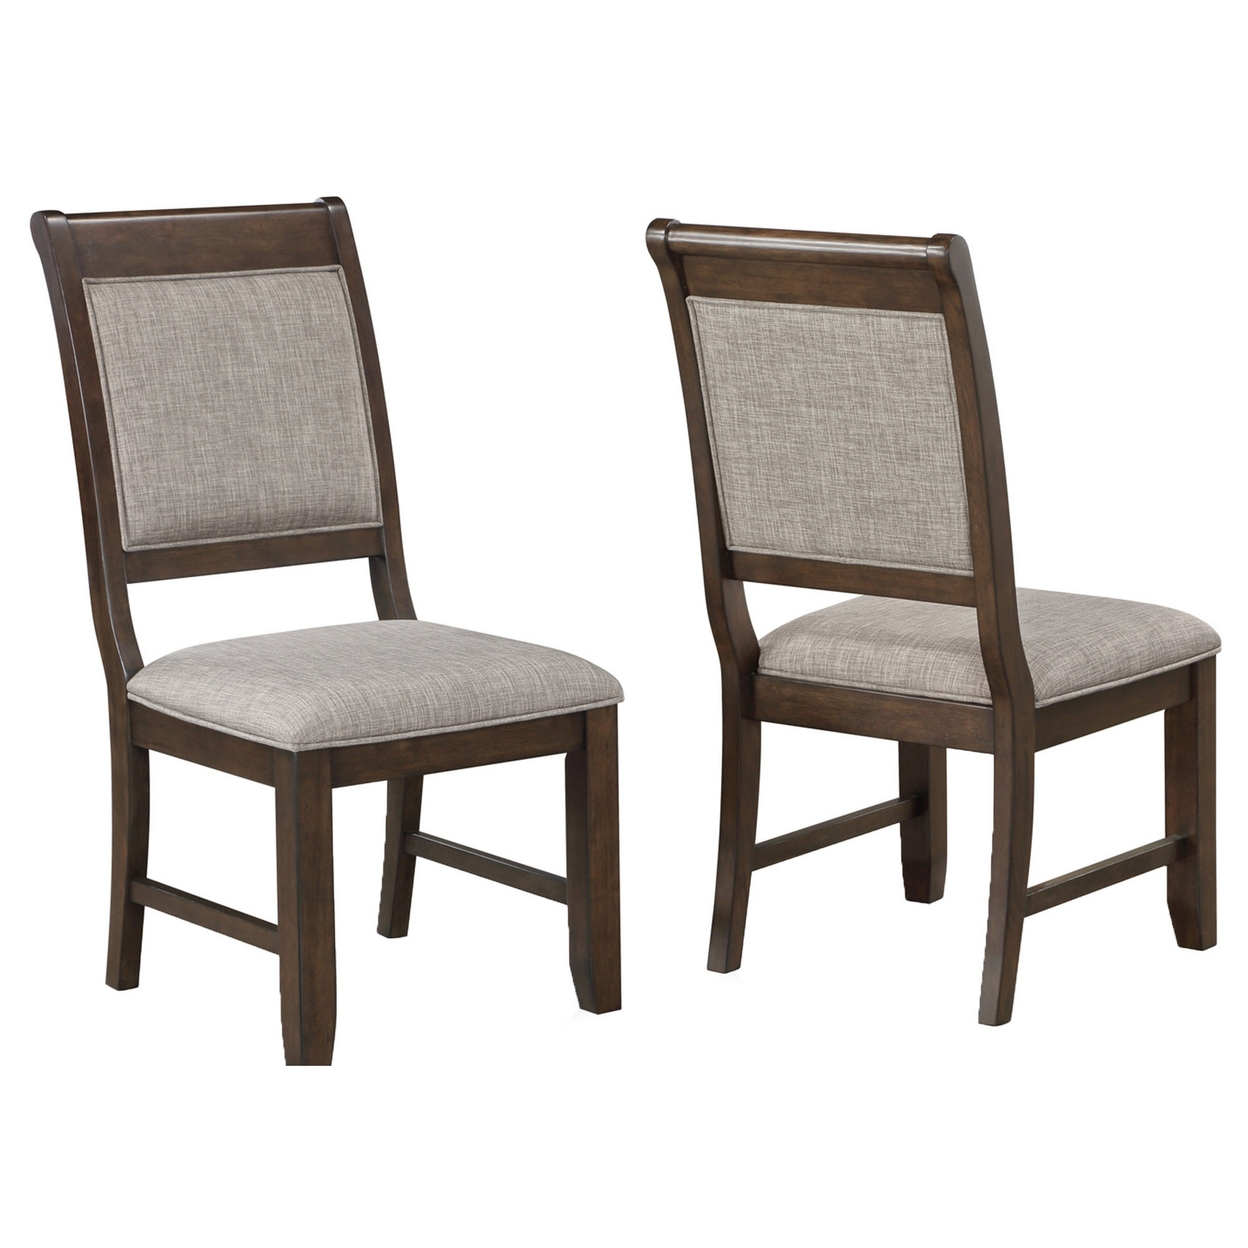 Dylan 20 Inch Side Chair Set Of 2, Gray Fabric Upholstery, Brown Wood -Saltoro Sherpi